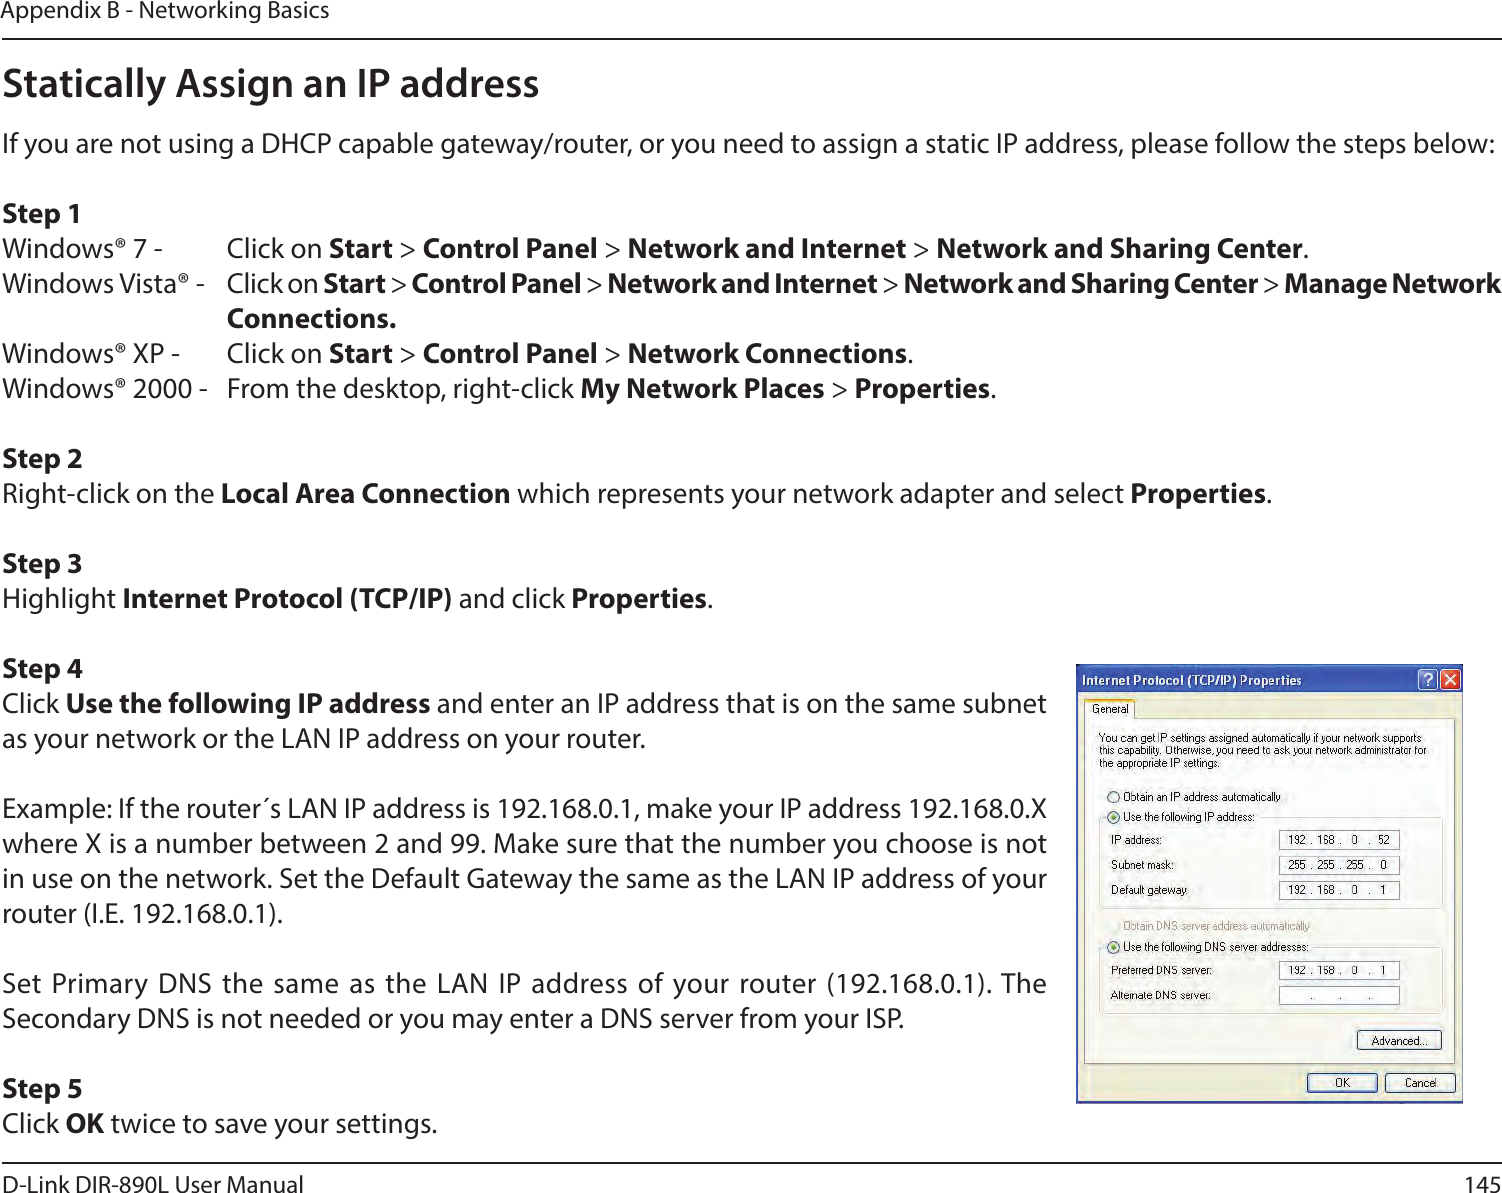 145D-Link DIR-890L User ManualAppendix B - Networking BasicsStatically Assign an IP addressIf you are not using a DHCP capable gateway/router, or you need to assign a static IP address, please follow the steps below:Step 1Windows® 7 -  Click on Start &gt; Control Panel &gt; Network and Internet &gt; Network and Sharing Center.Windows Vista® -  Click on Start &gt; Control Panel &gt; Network and Internet &gt; Network and Sharing Center &gt; Manage Network    Connections.Windows® XP -  Click on Start &gt; Control Panel &gt; Network Connections.Windows® 2000 -  From the desktop, right-click My Network Places &gt; Properties.Step 2Right-click on the Local Area Connection which represents your network adapter and select Properties.Step 3Highlight Internet Protocol (TCP/IP) and click Properties.Step 4Click Use the following IP address and enter an IP address that is on the same subnet as your network or the LAN IP address on your router. Example: If the router´s LAN IP address is 192.168.0.1, make your IP address 192.168.0.X where X is a number between 2 and 99. Make sure that the number you choose is not in use on the network. Set the Default Gateway the same as the LAN IP address of your router (I.E. 192.168.0.1). Set Primary DNS the same as the LAN IP address of your router (192.168.0.1). The Secondary DNS is not needed or you may enter a DNS server from your ISP.Step 5Click OK twice to save your settings.